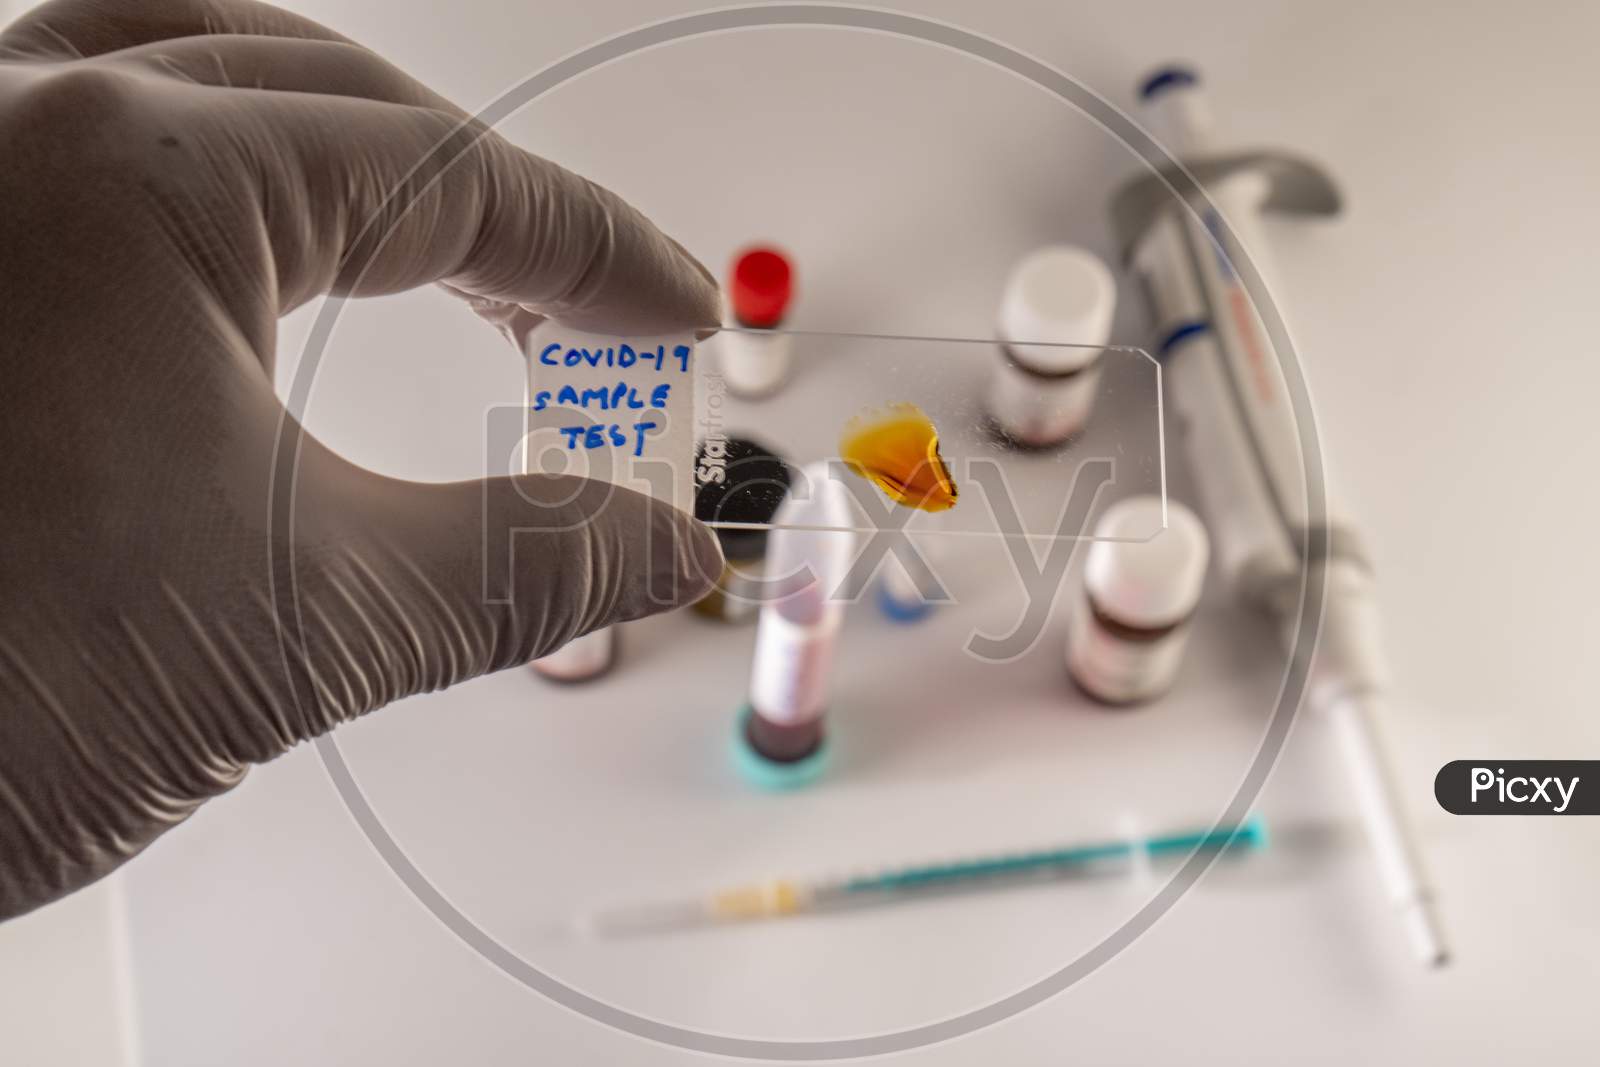 Photo concept shows Covid-19 sample analysis using a microscopic glass slide, with chemicals, syringe, and pipette in the blurred background.